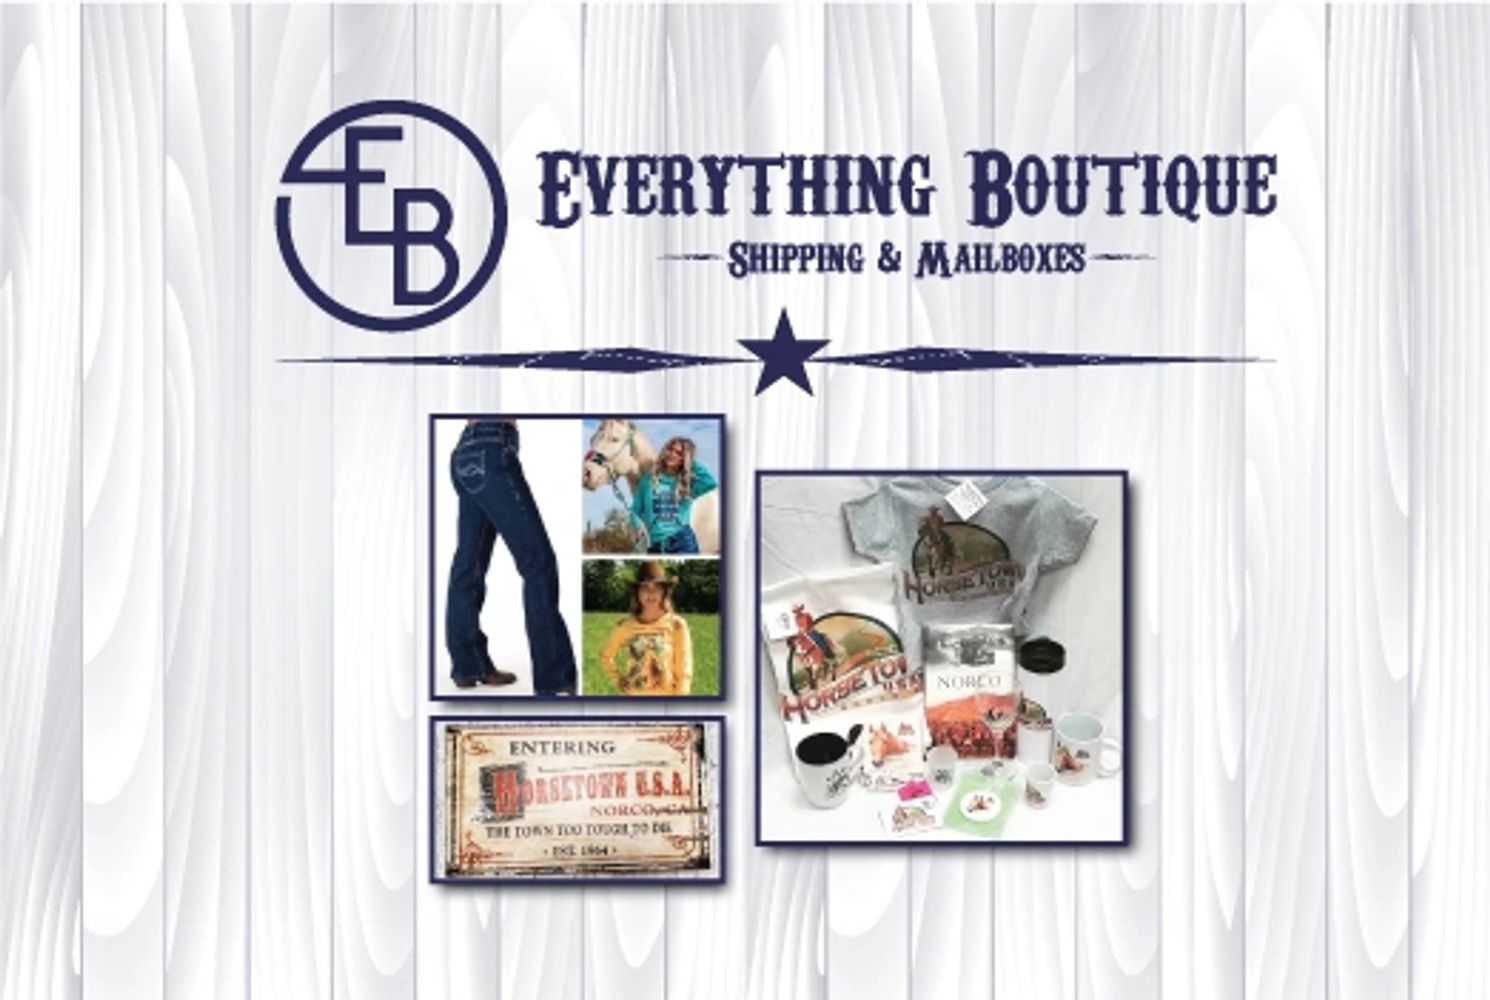 business logo and examples of clothing, decor, and gift products sold in the store